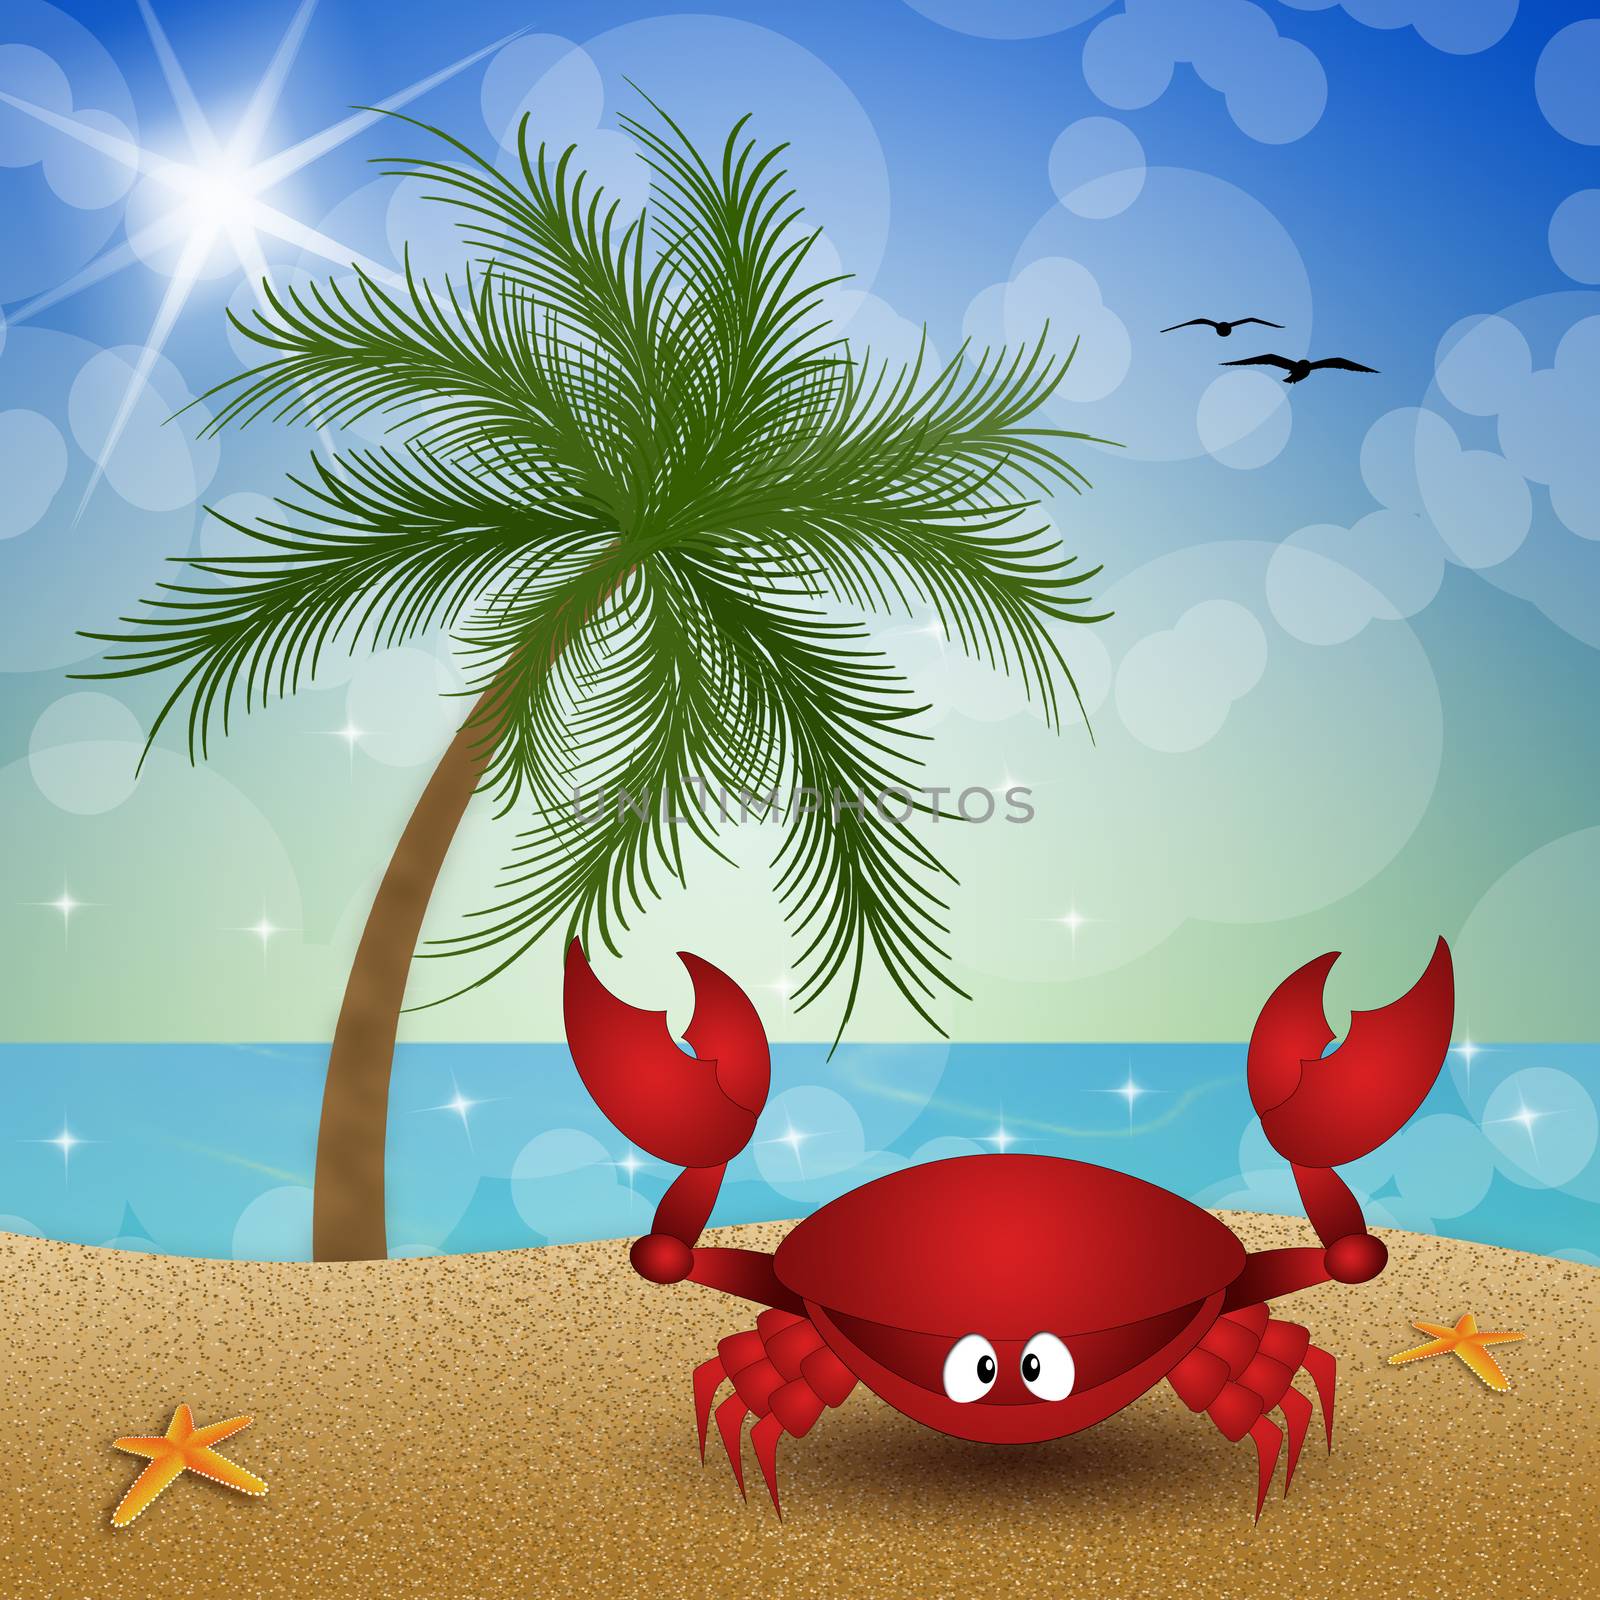 Crab on the beach by sognolucido